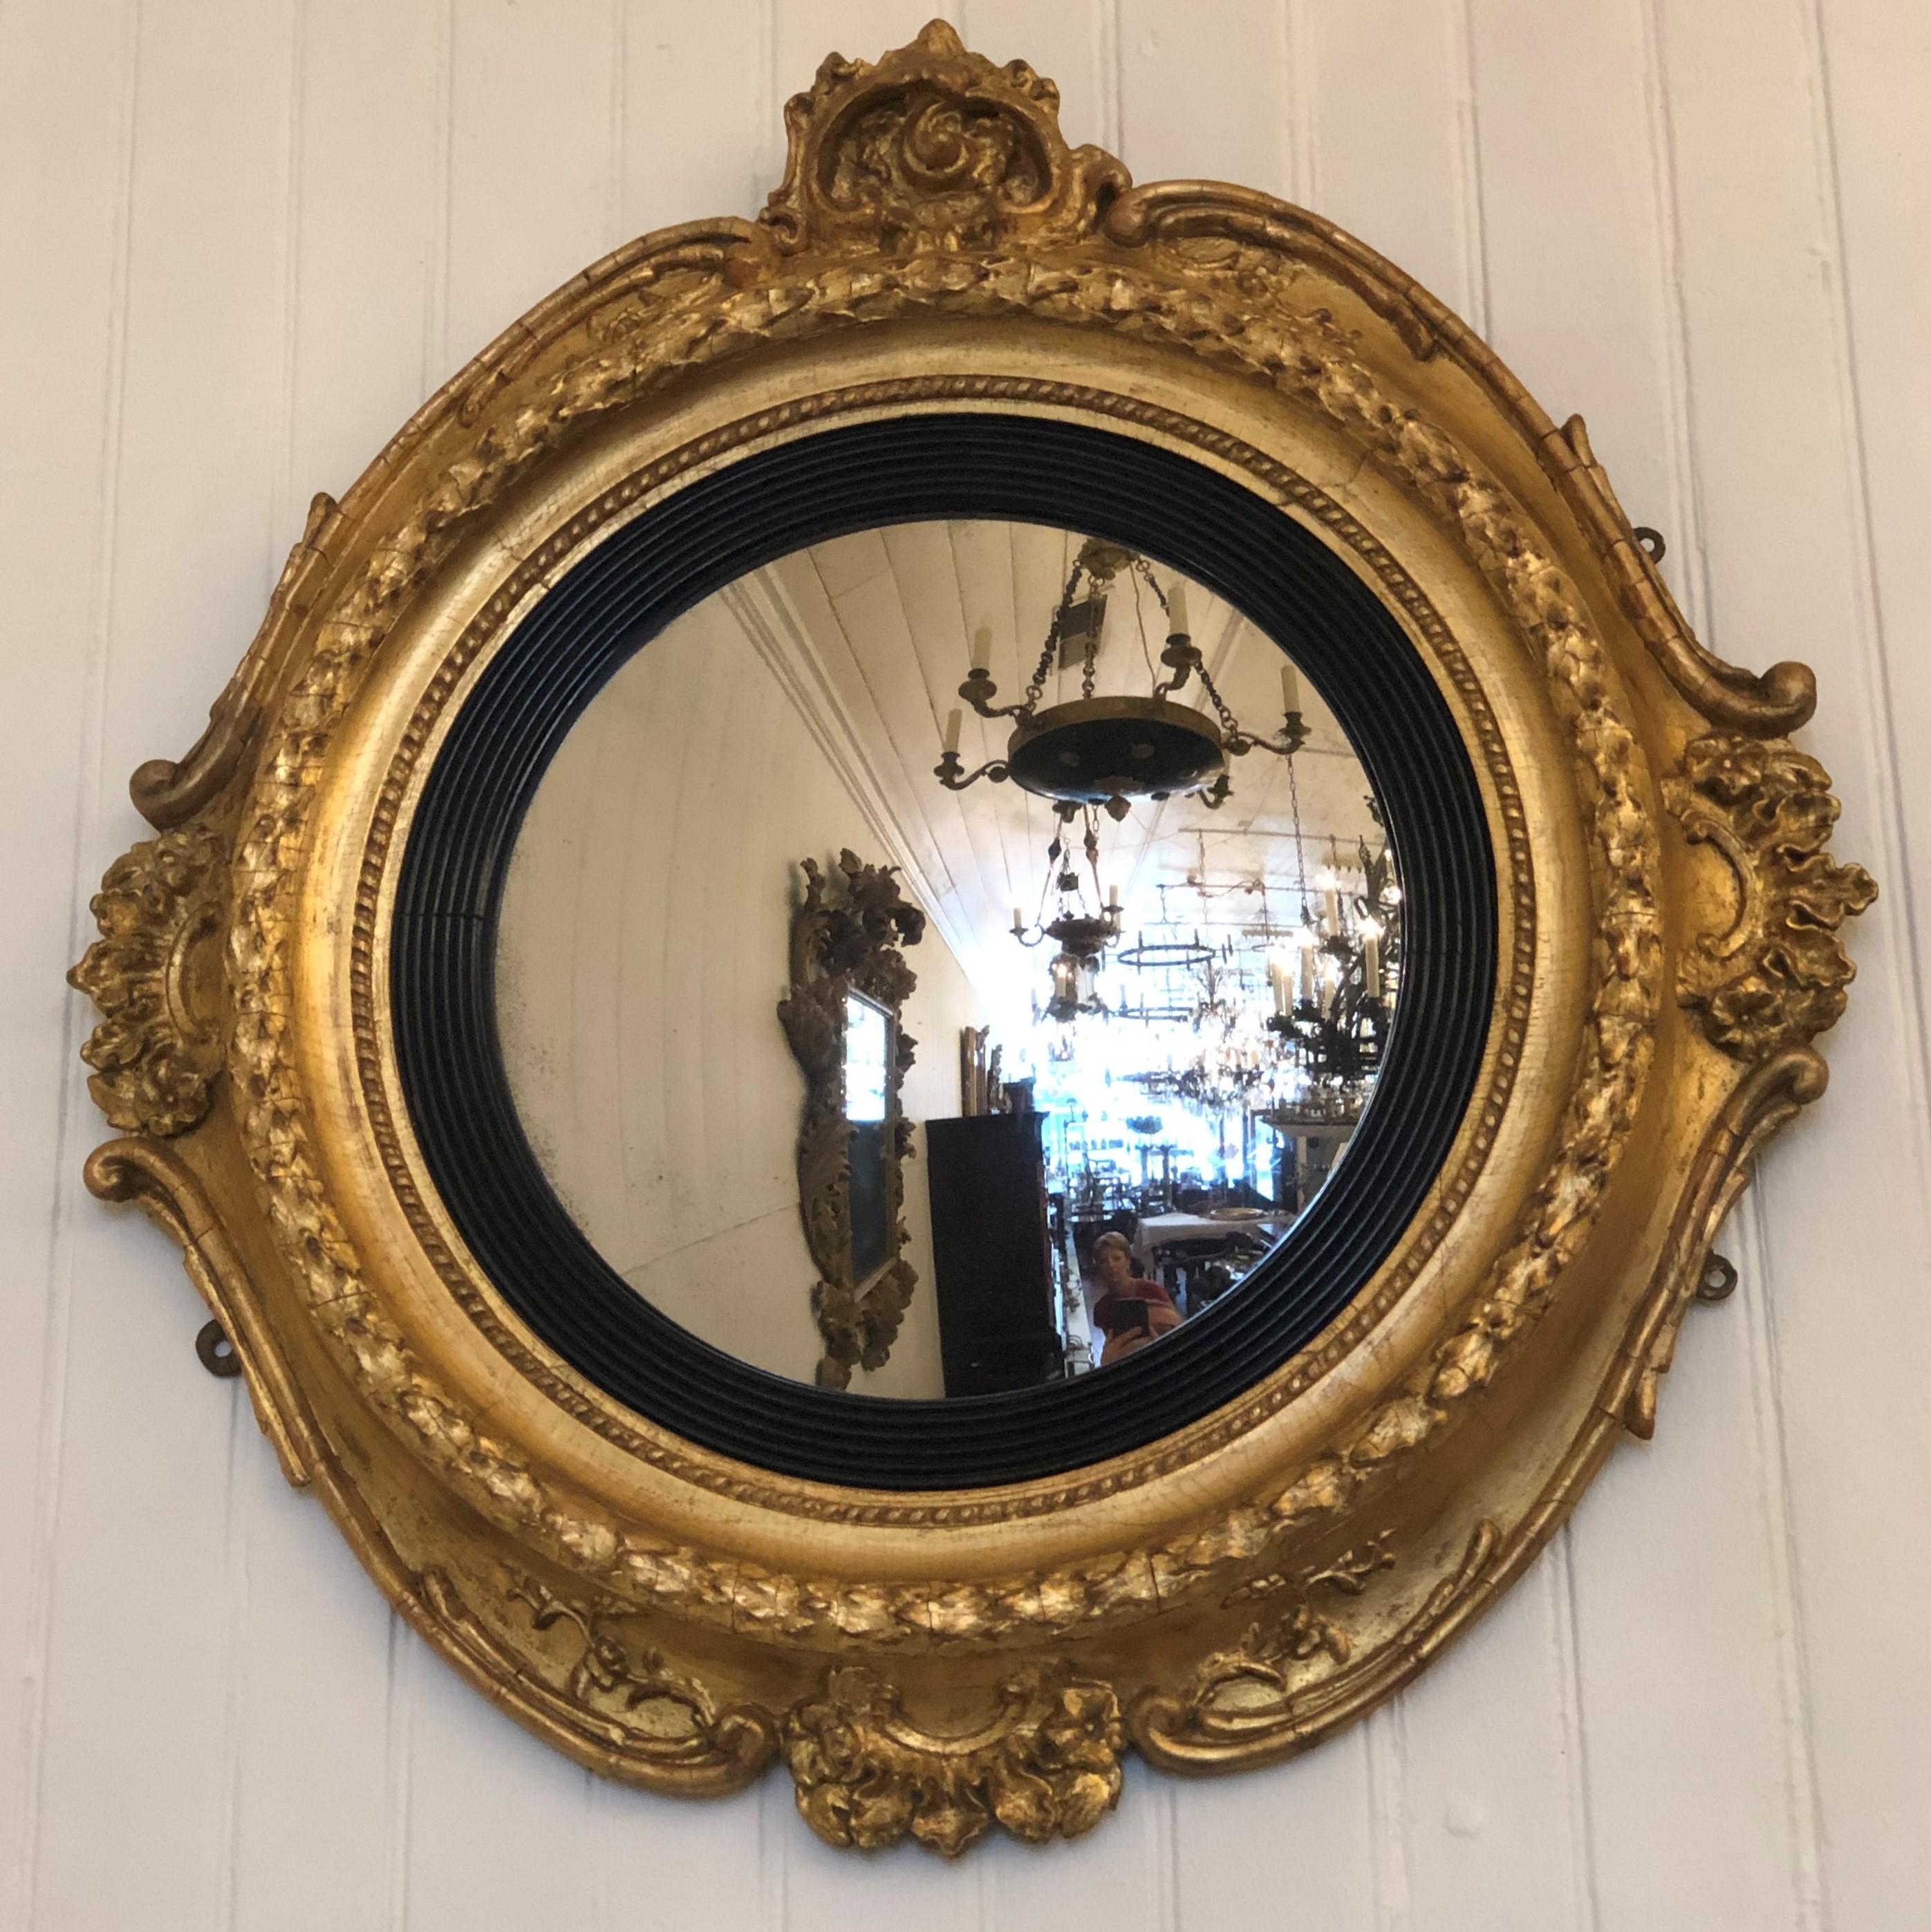 This 1830s Boston convex mirror has a wonderful scrolled frame with a foliate crest centered on the four quarters. The central feature of the frame has an oak leaf ring stepping down to a reeded ebony ring which frames the mirror.